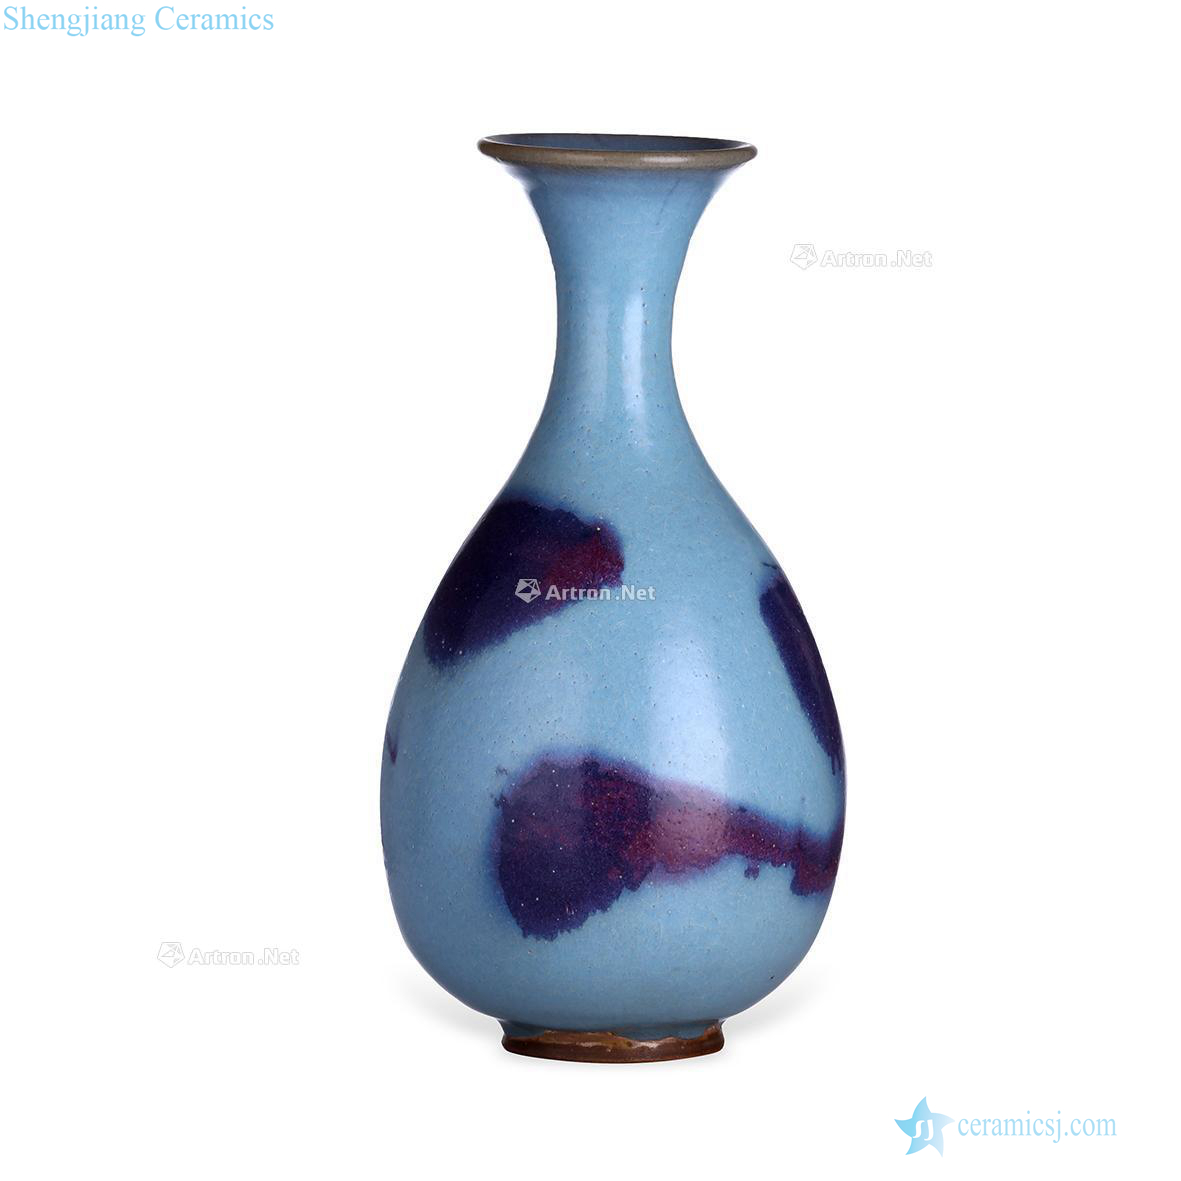 The song dynasty Purple masterpieces okho spring bottle